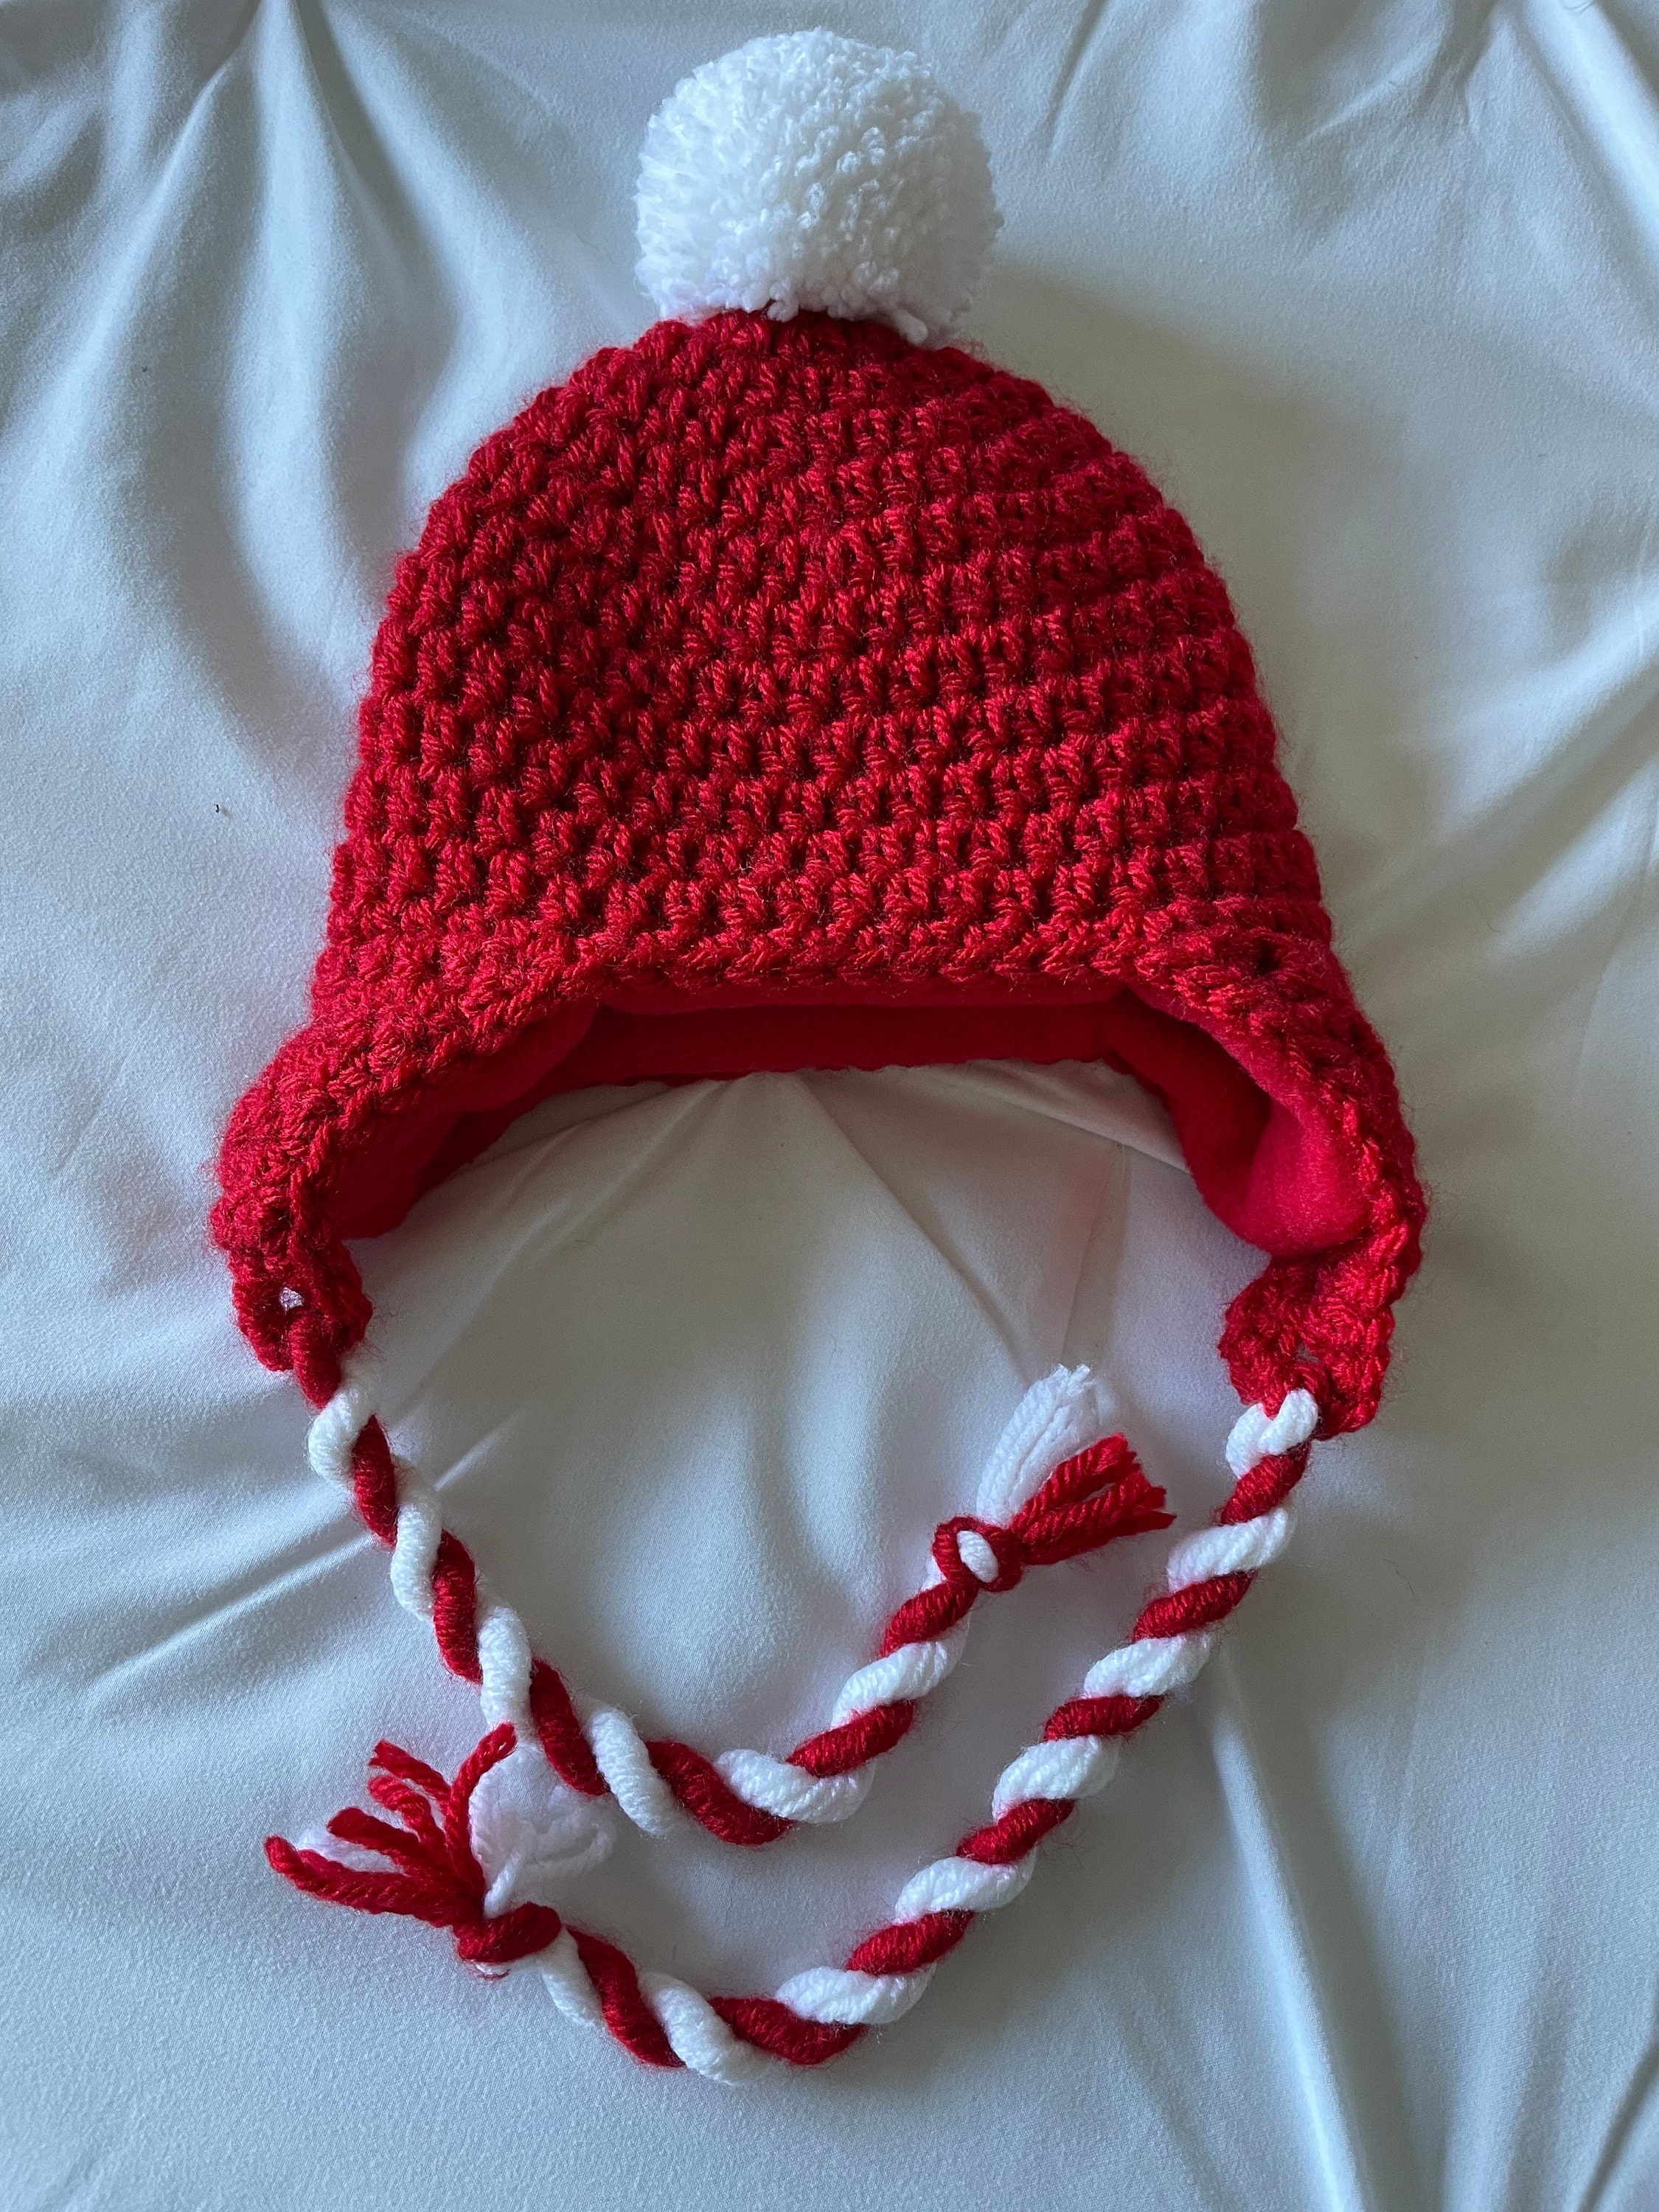 Crochet Hat With Earflaps Red and White Hat With Earflaps